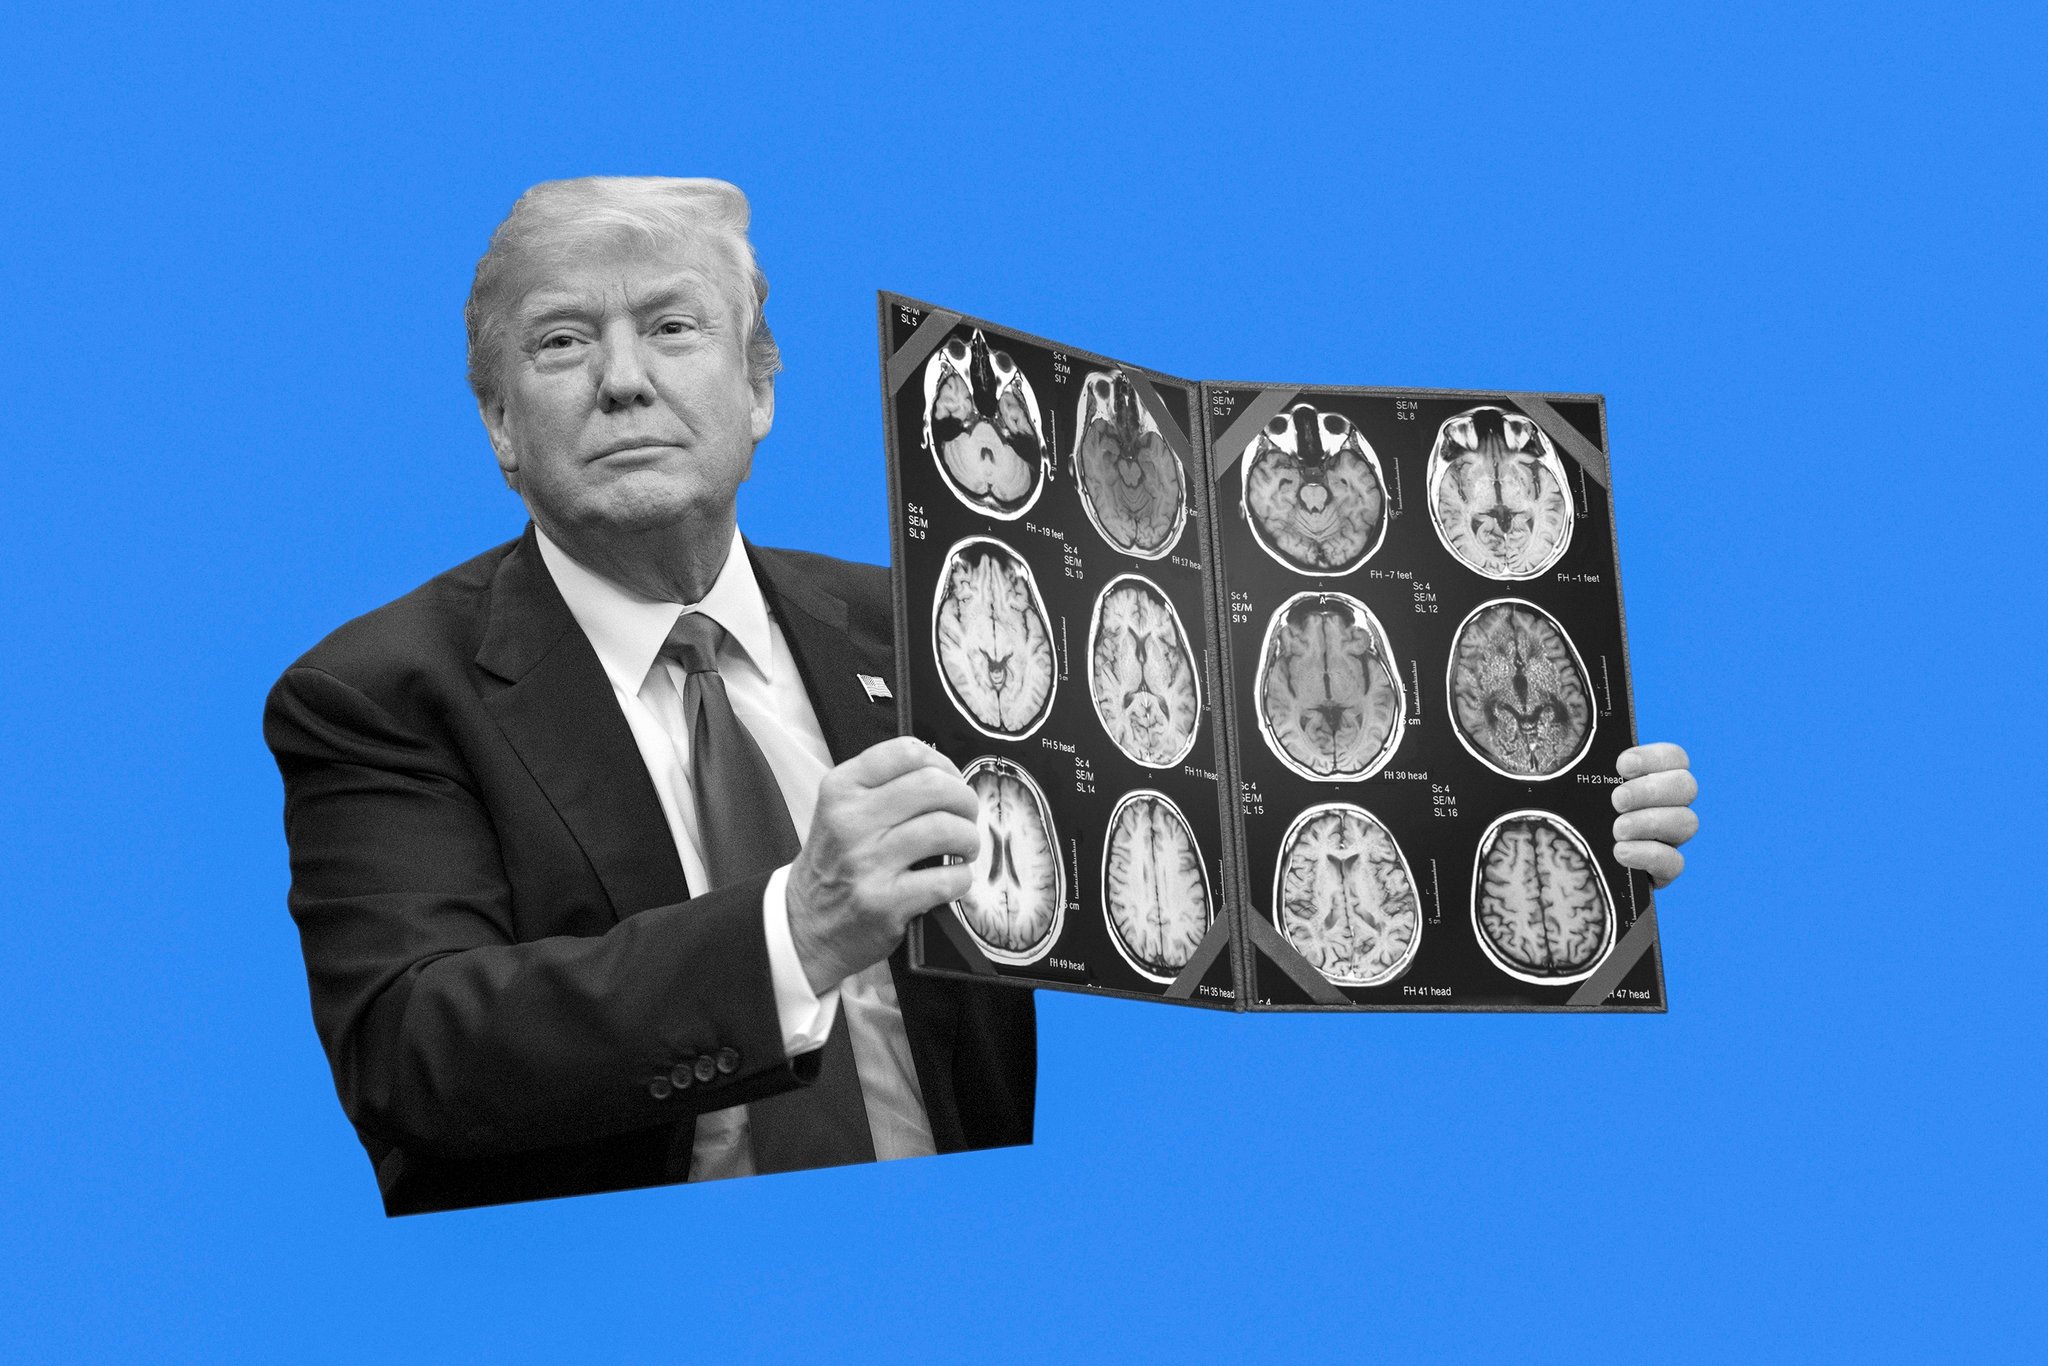 Black areas clearly show neuropsychiatric condition - mental disorders; the ability to work. pathological lying, extreme narcissism, adult temper tantrums, not realizing what one says - flip flops - from one moment to the next, signs of dementia/alzheimers.